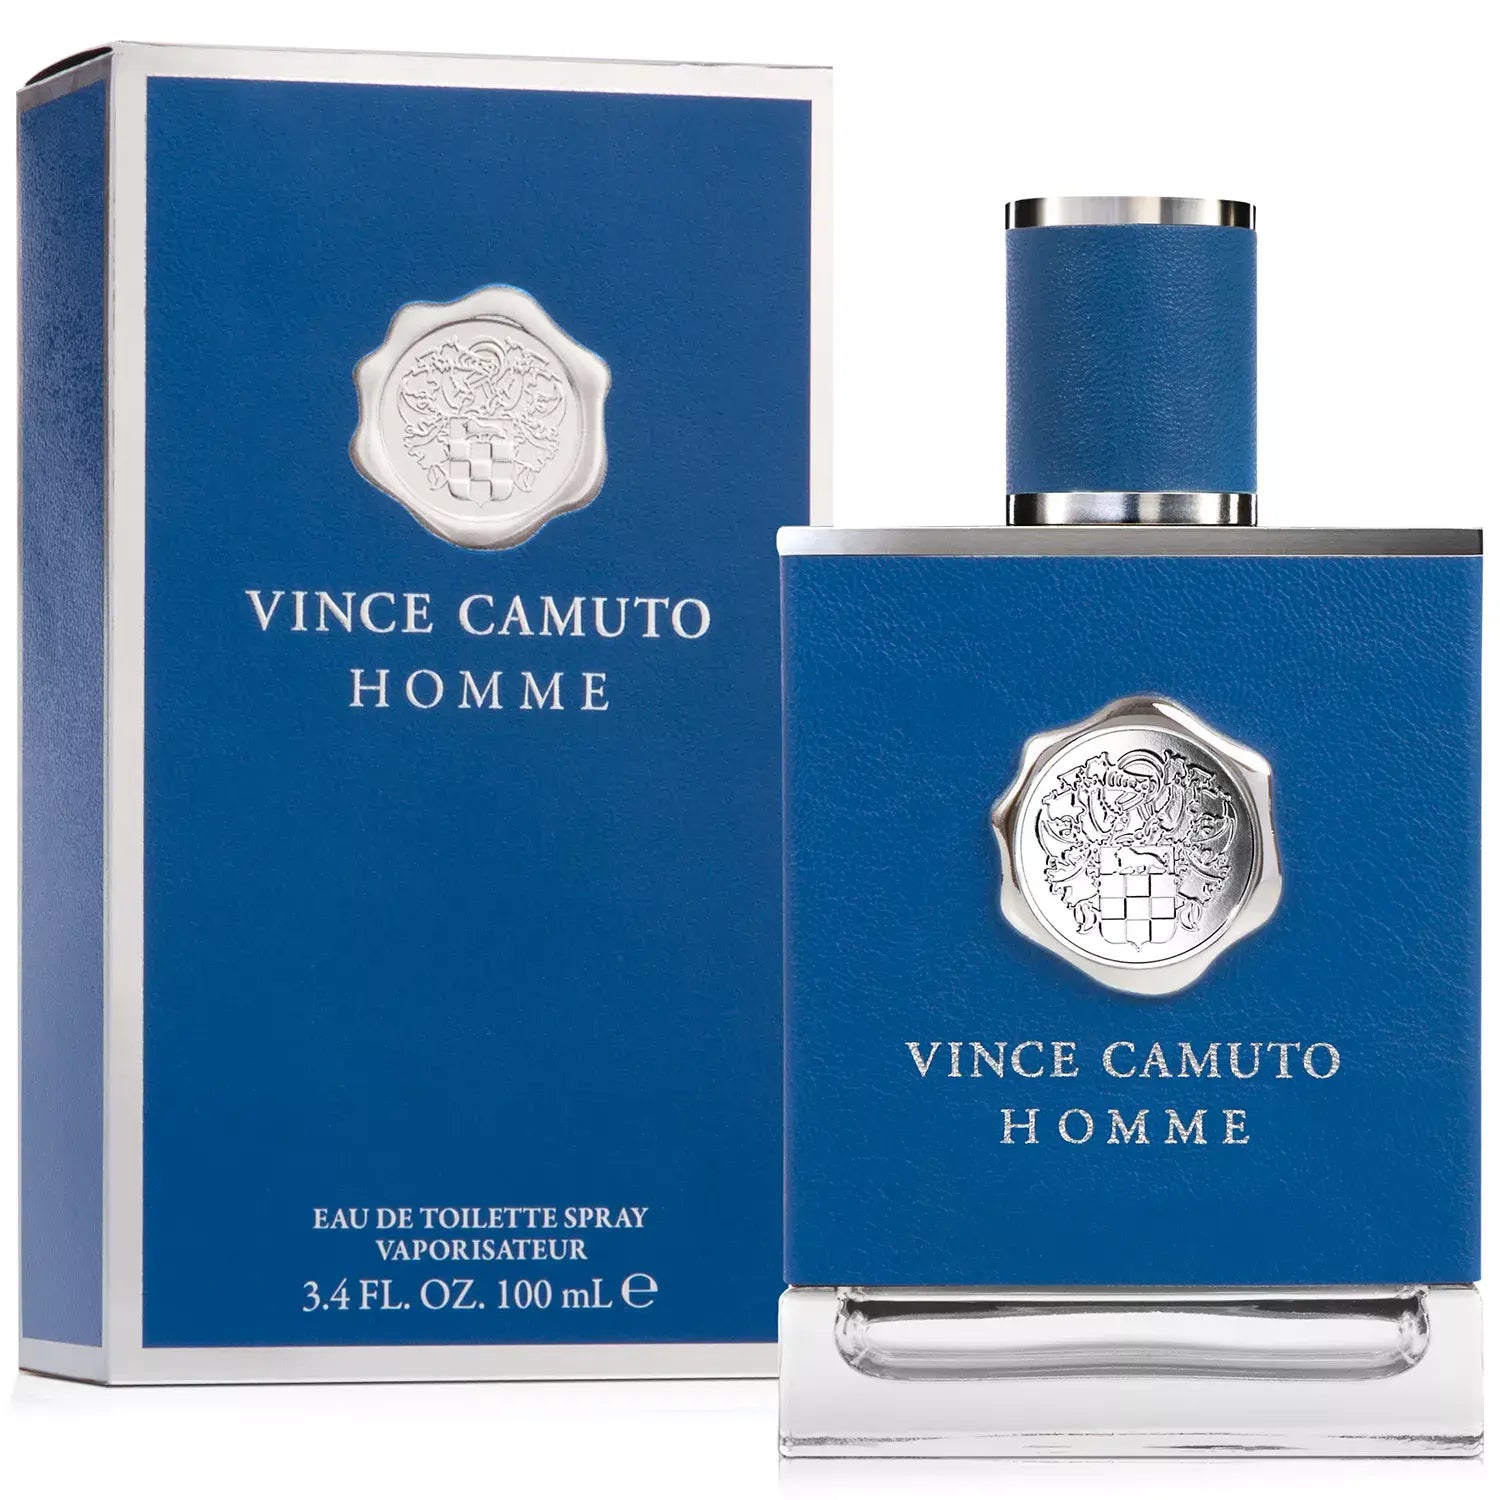 Vince Camuto Homme by Vince Camuto 1.7 oz EDT Spray for Men